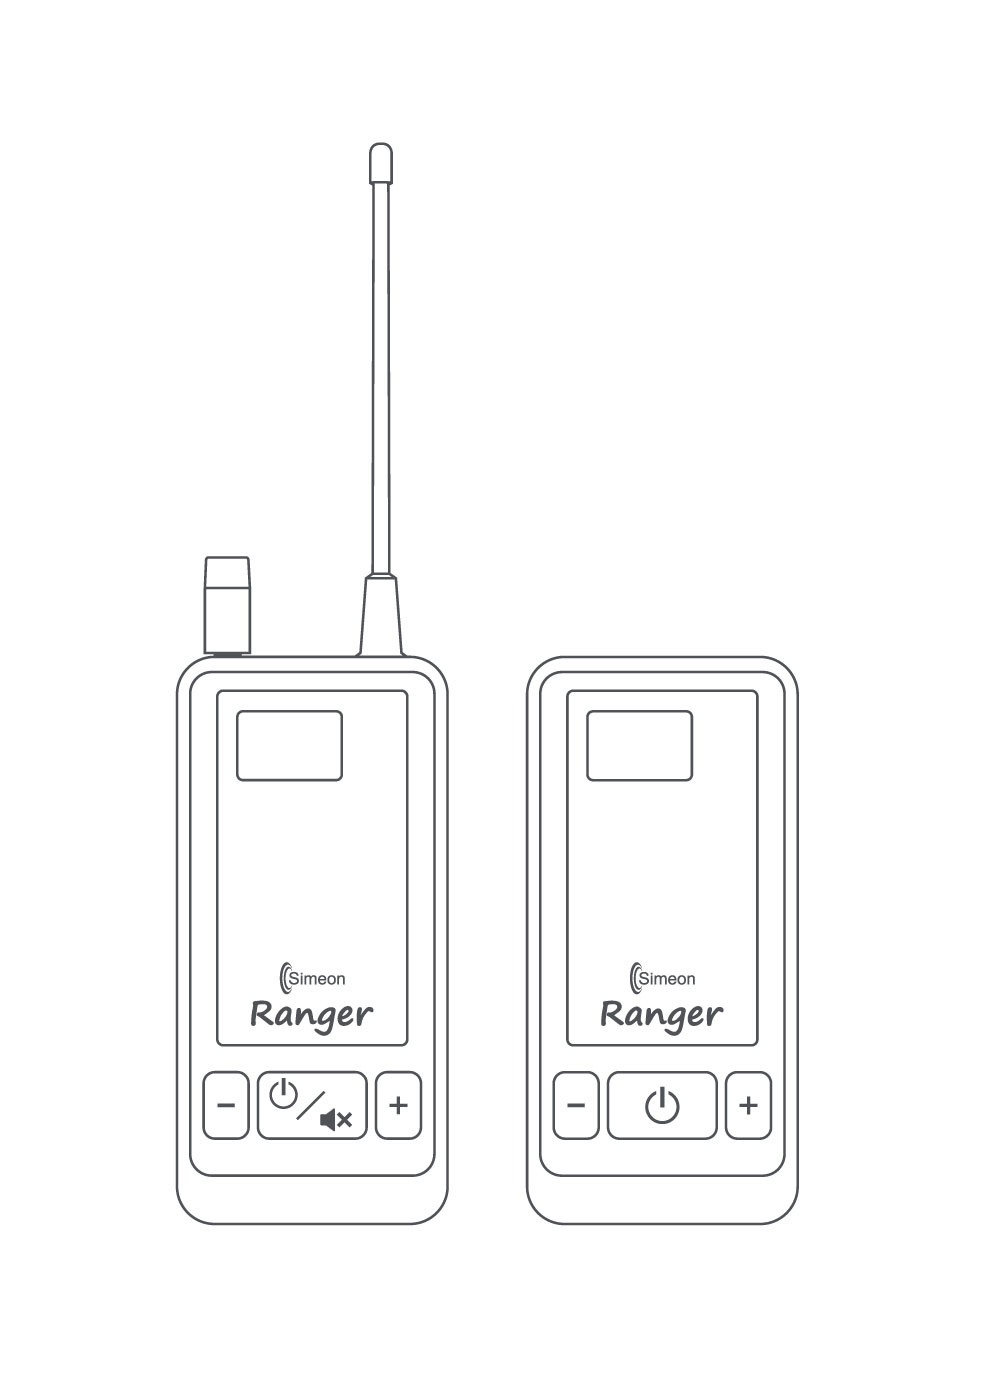 Simeon Ranger is a personal fm device for listeners. It is a wireless personal fm. Great for individuals with hearing loss, hard of hearing, and or hearing difficulties.